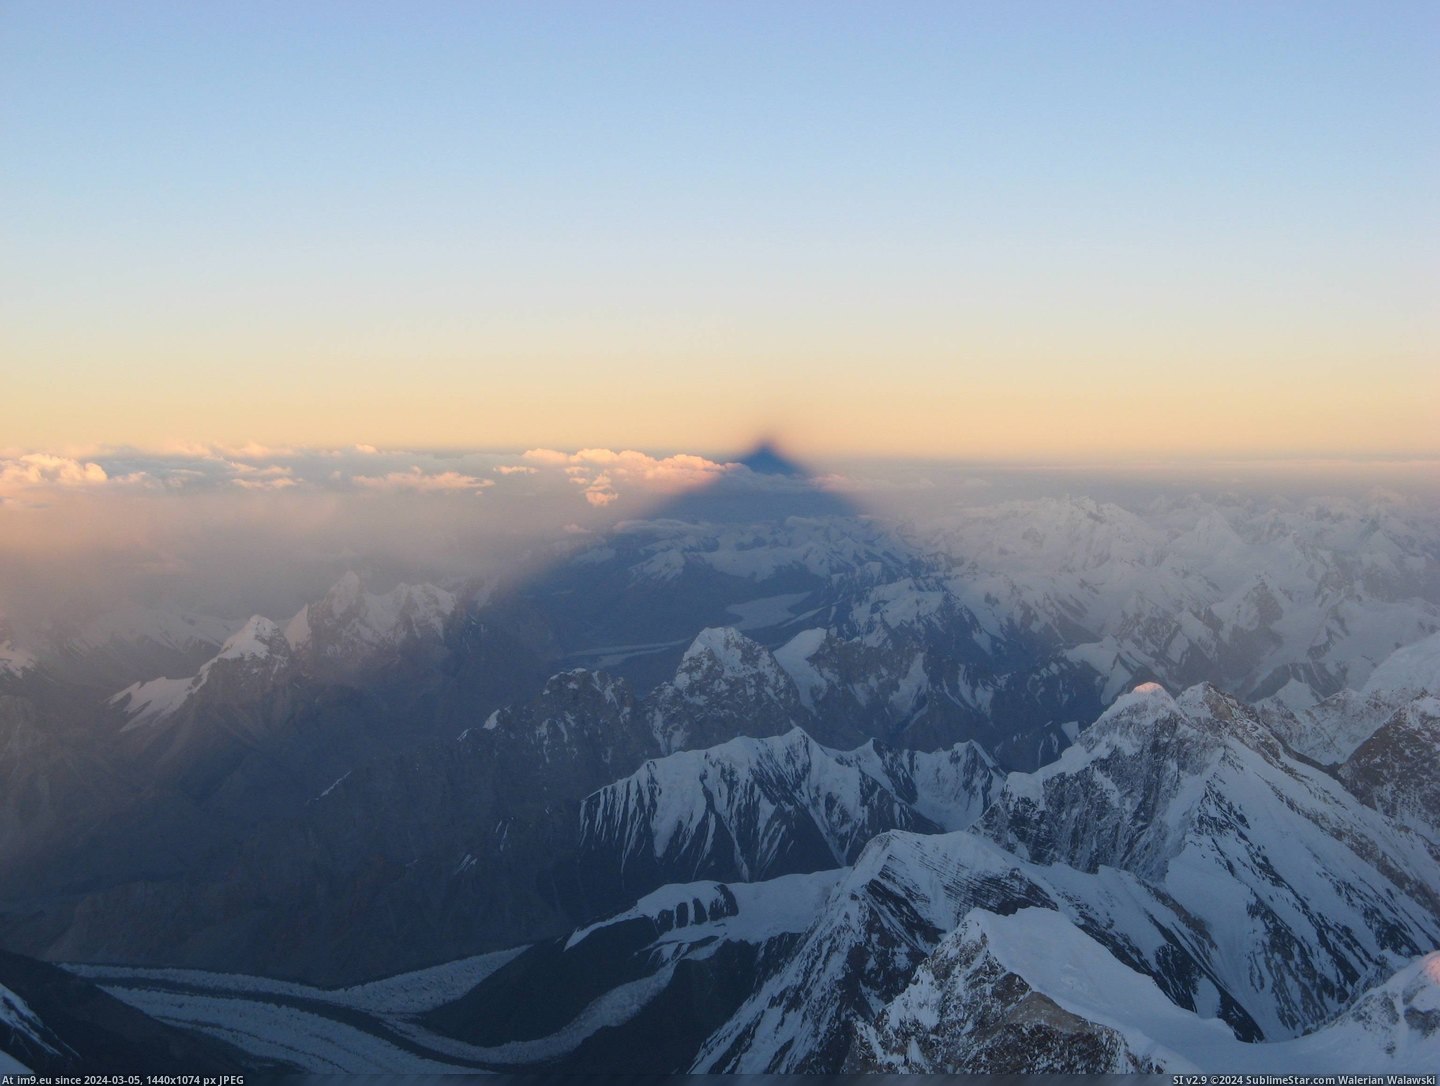 #China #Shadow #Miles #Projected #Warner #Chris #3072x2304 #Hundreds [Earthporn] The Shadow of K2, projected into China across hundreds of miles. (Chris B. Warner) [3072x2304] Pic. (Image of album My r/EARTHPORN favs))